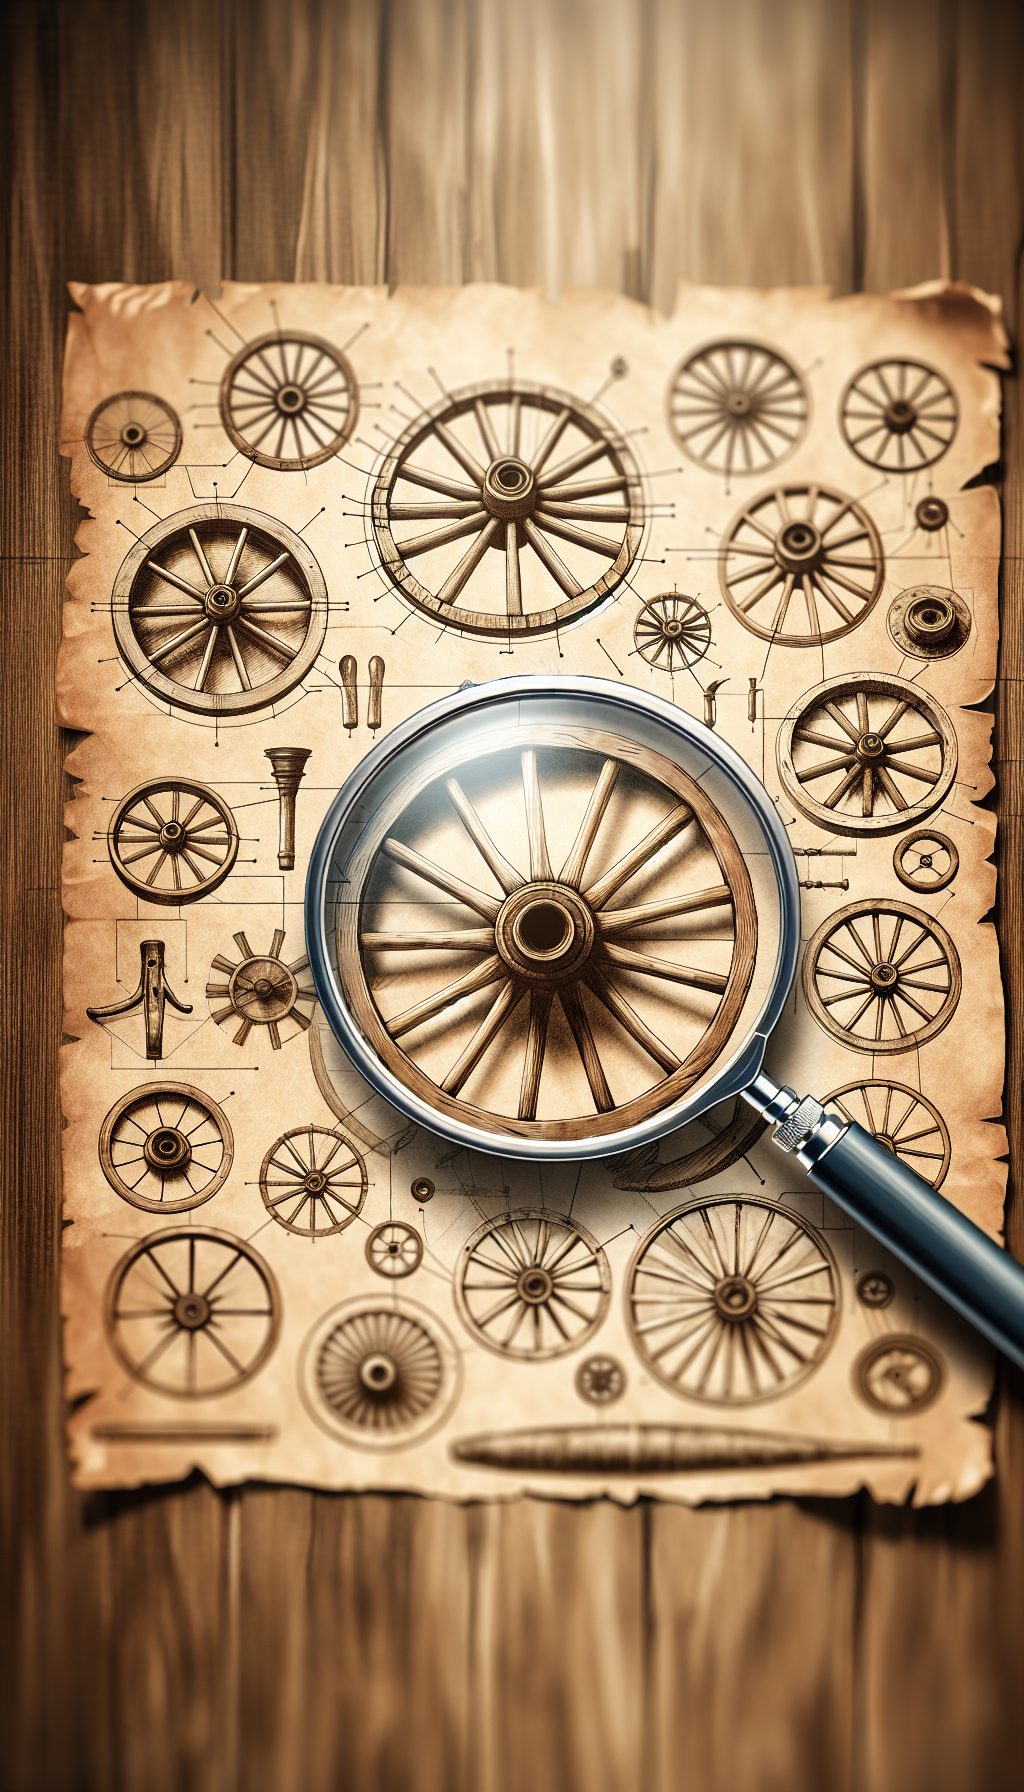 An illustration depicts an exploded view of an antique wagon wheel, with labeled parts floating against a parchment backdrop. A magnifying glass looms over, highlighting unique craftsmanship on the spokes, while a ghosted image of a modern wheel contrasts in the background, subtly guiding observers to spot the differences and identify historic traits in wagon wheel design.